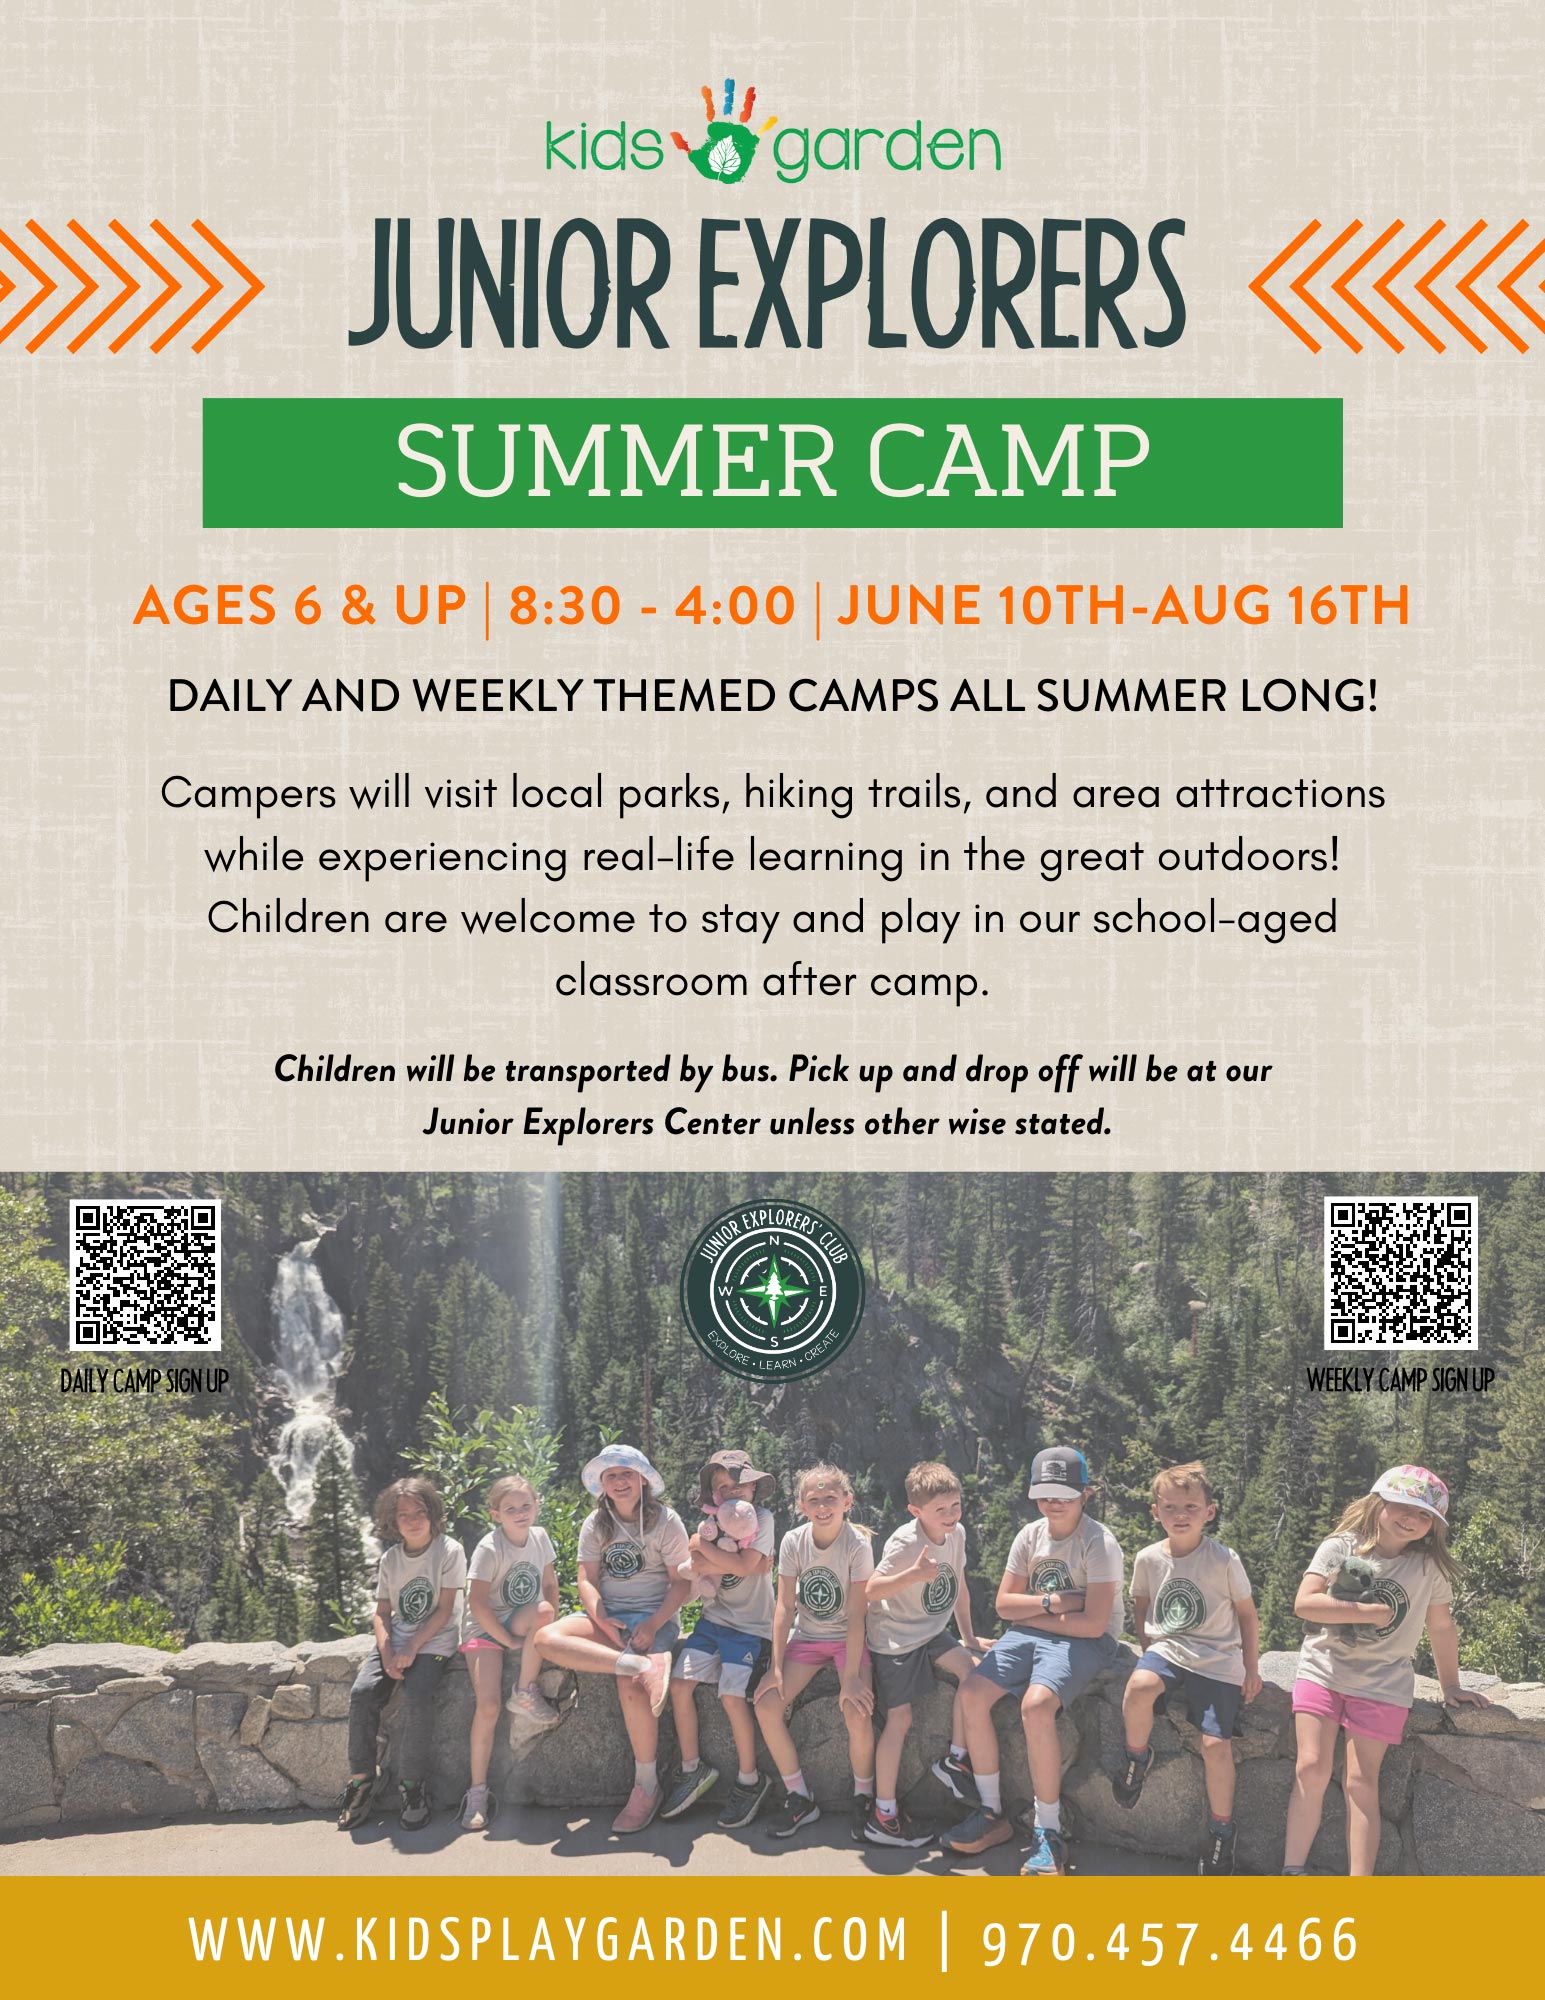 SIGN UP FOR JUNIOR EXPLORERS AGES 6 & UP